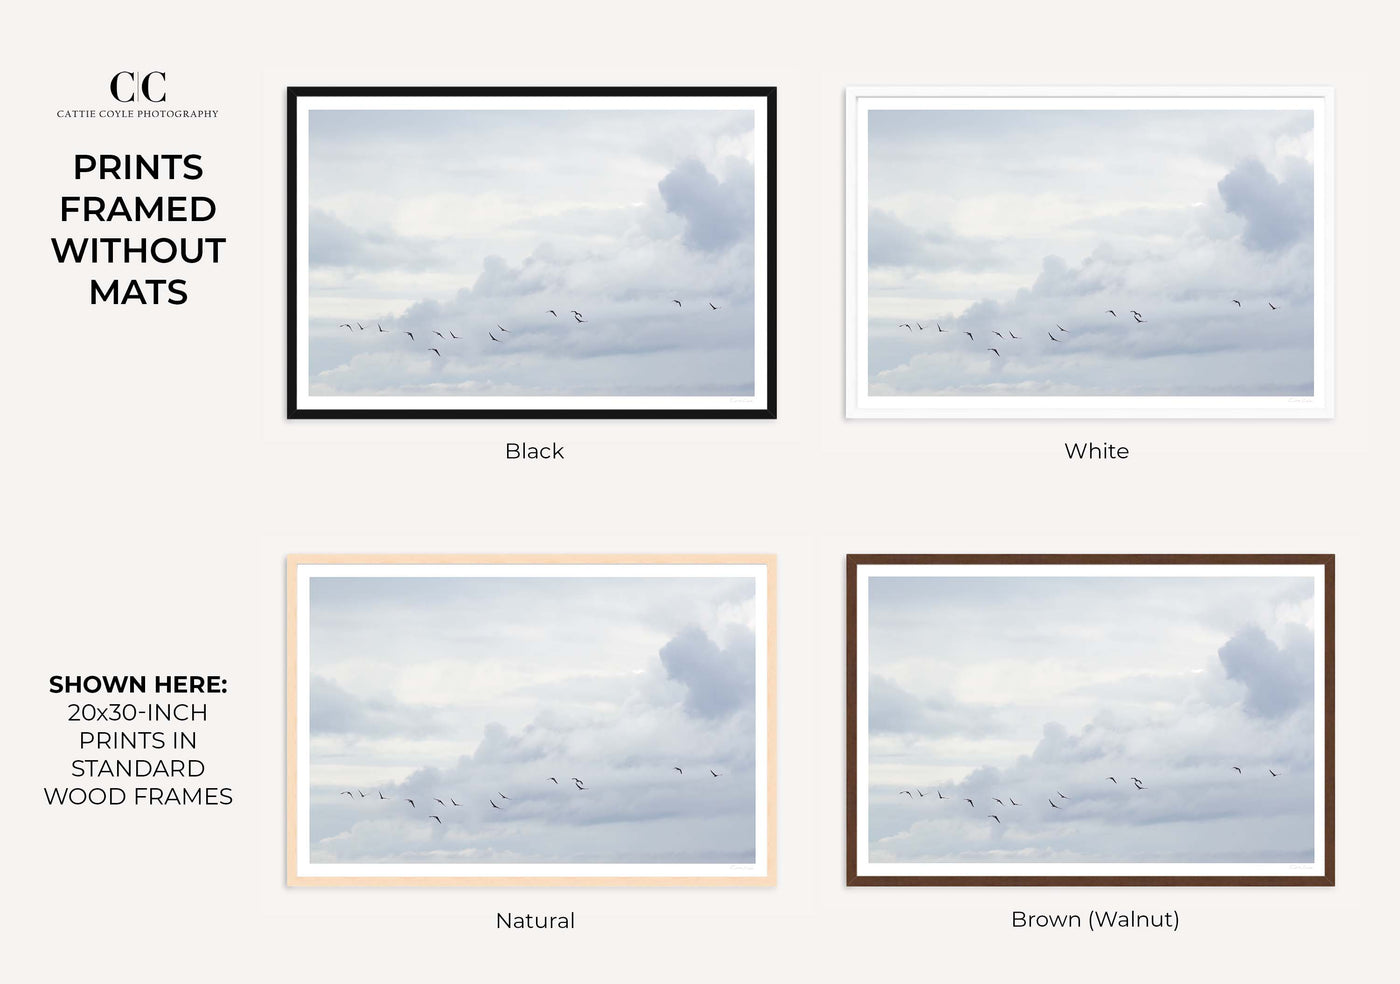 Flying birds art prints by Cattie Coyle Photography framed without mats